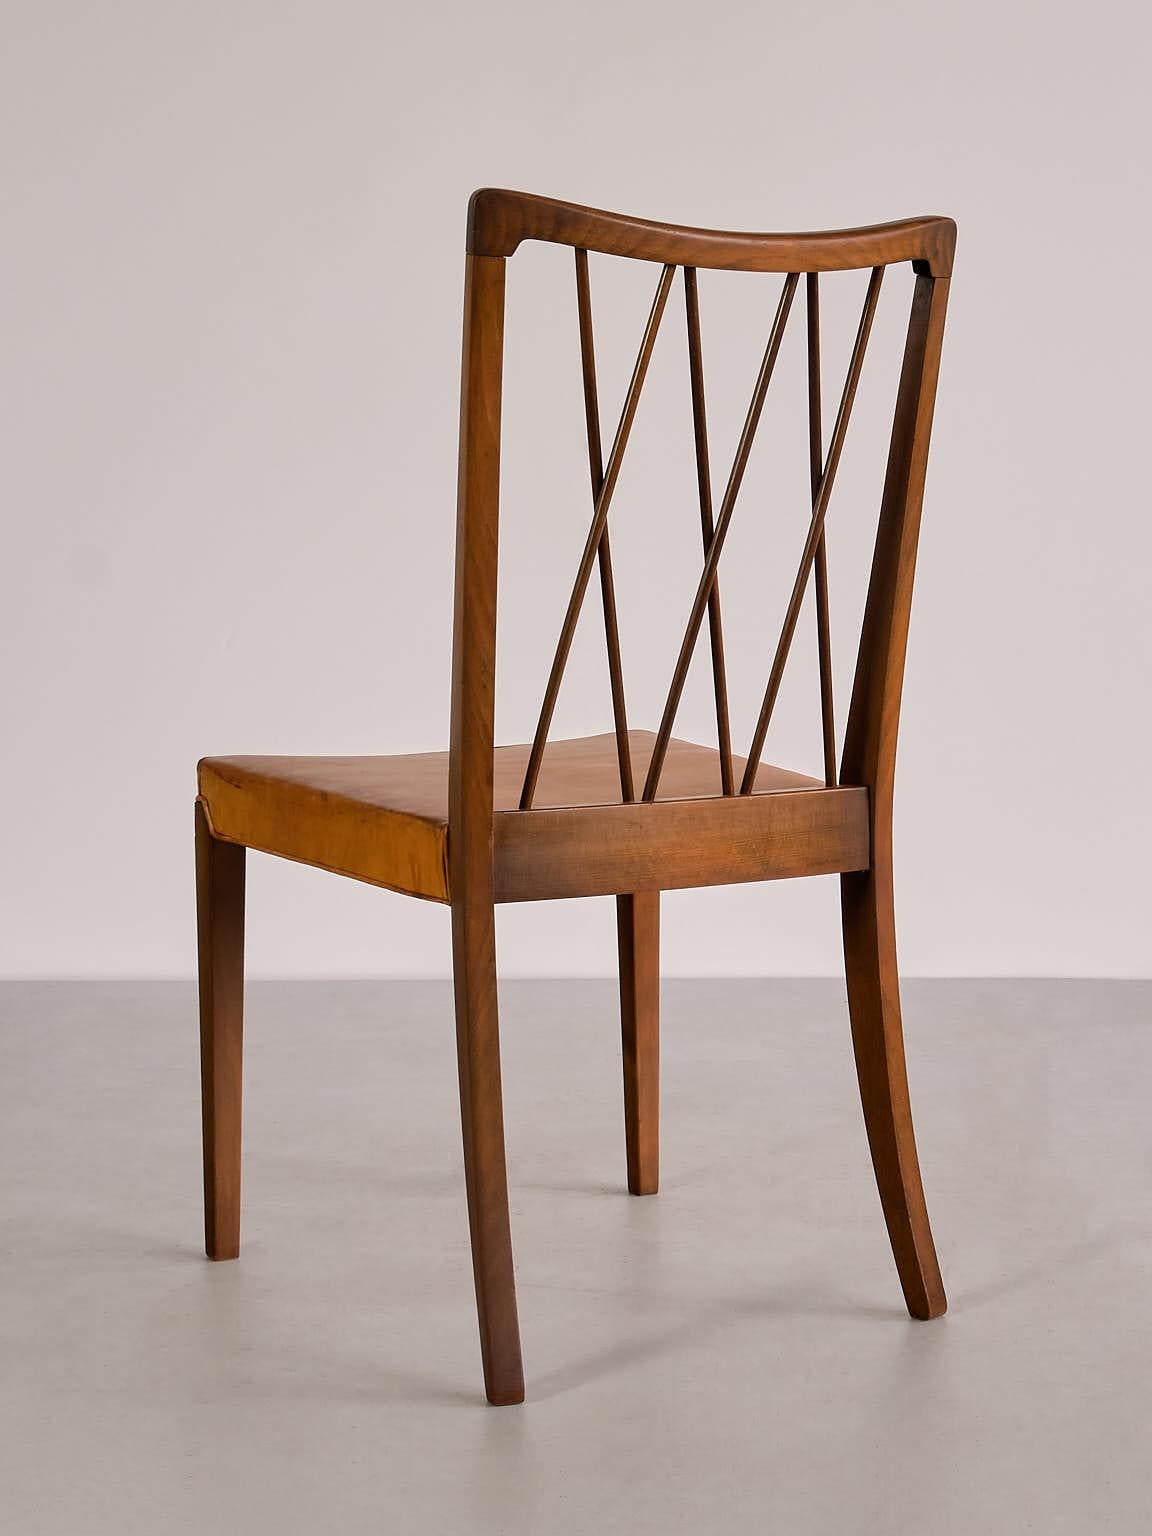 Set of Eight Frode Holm Dining Chairs, Walnut and Leather, Illum, Denmark, 1940s For Sale 12